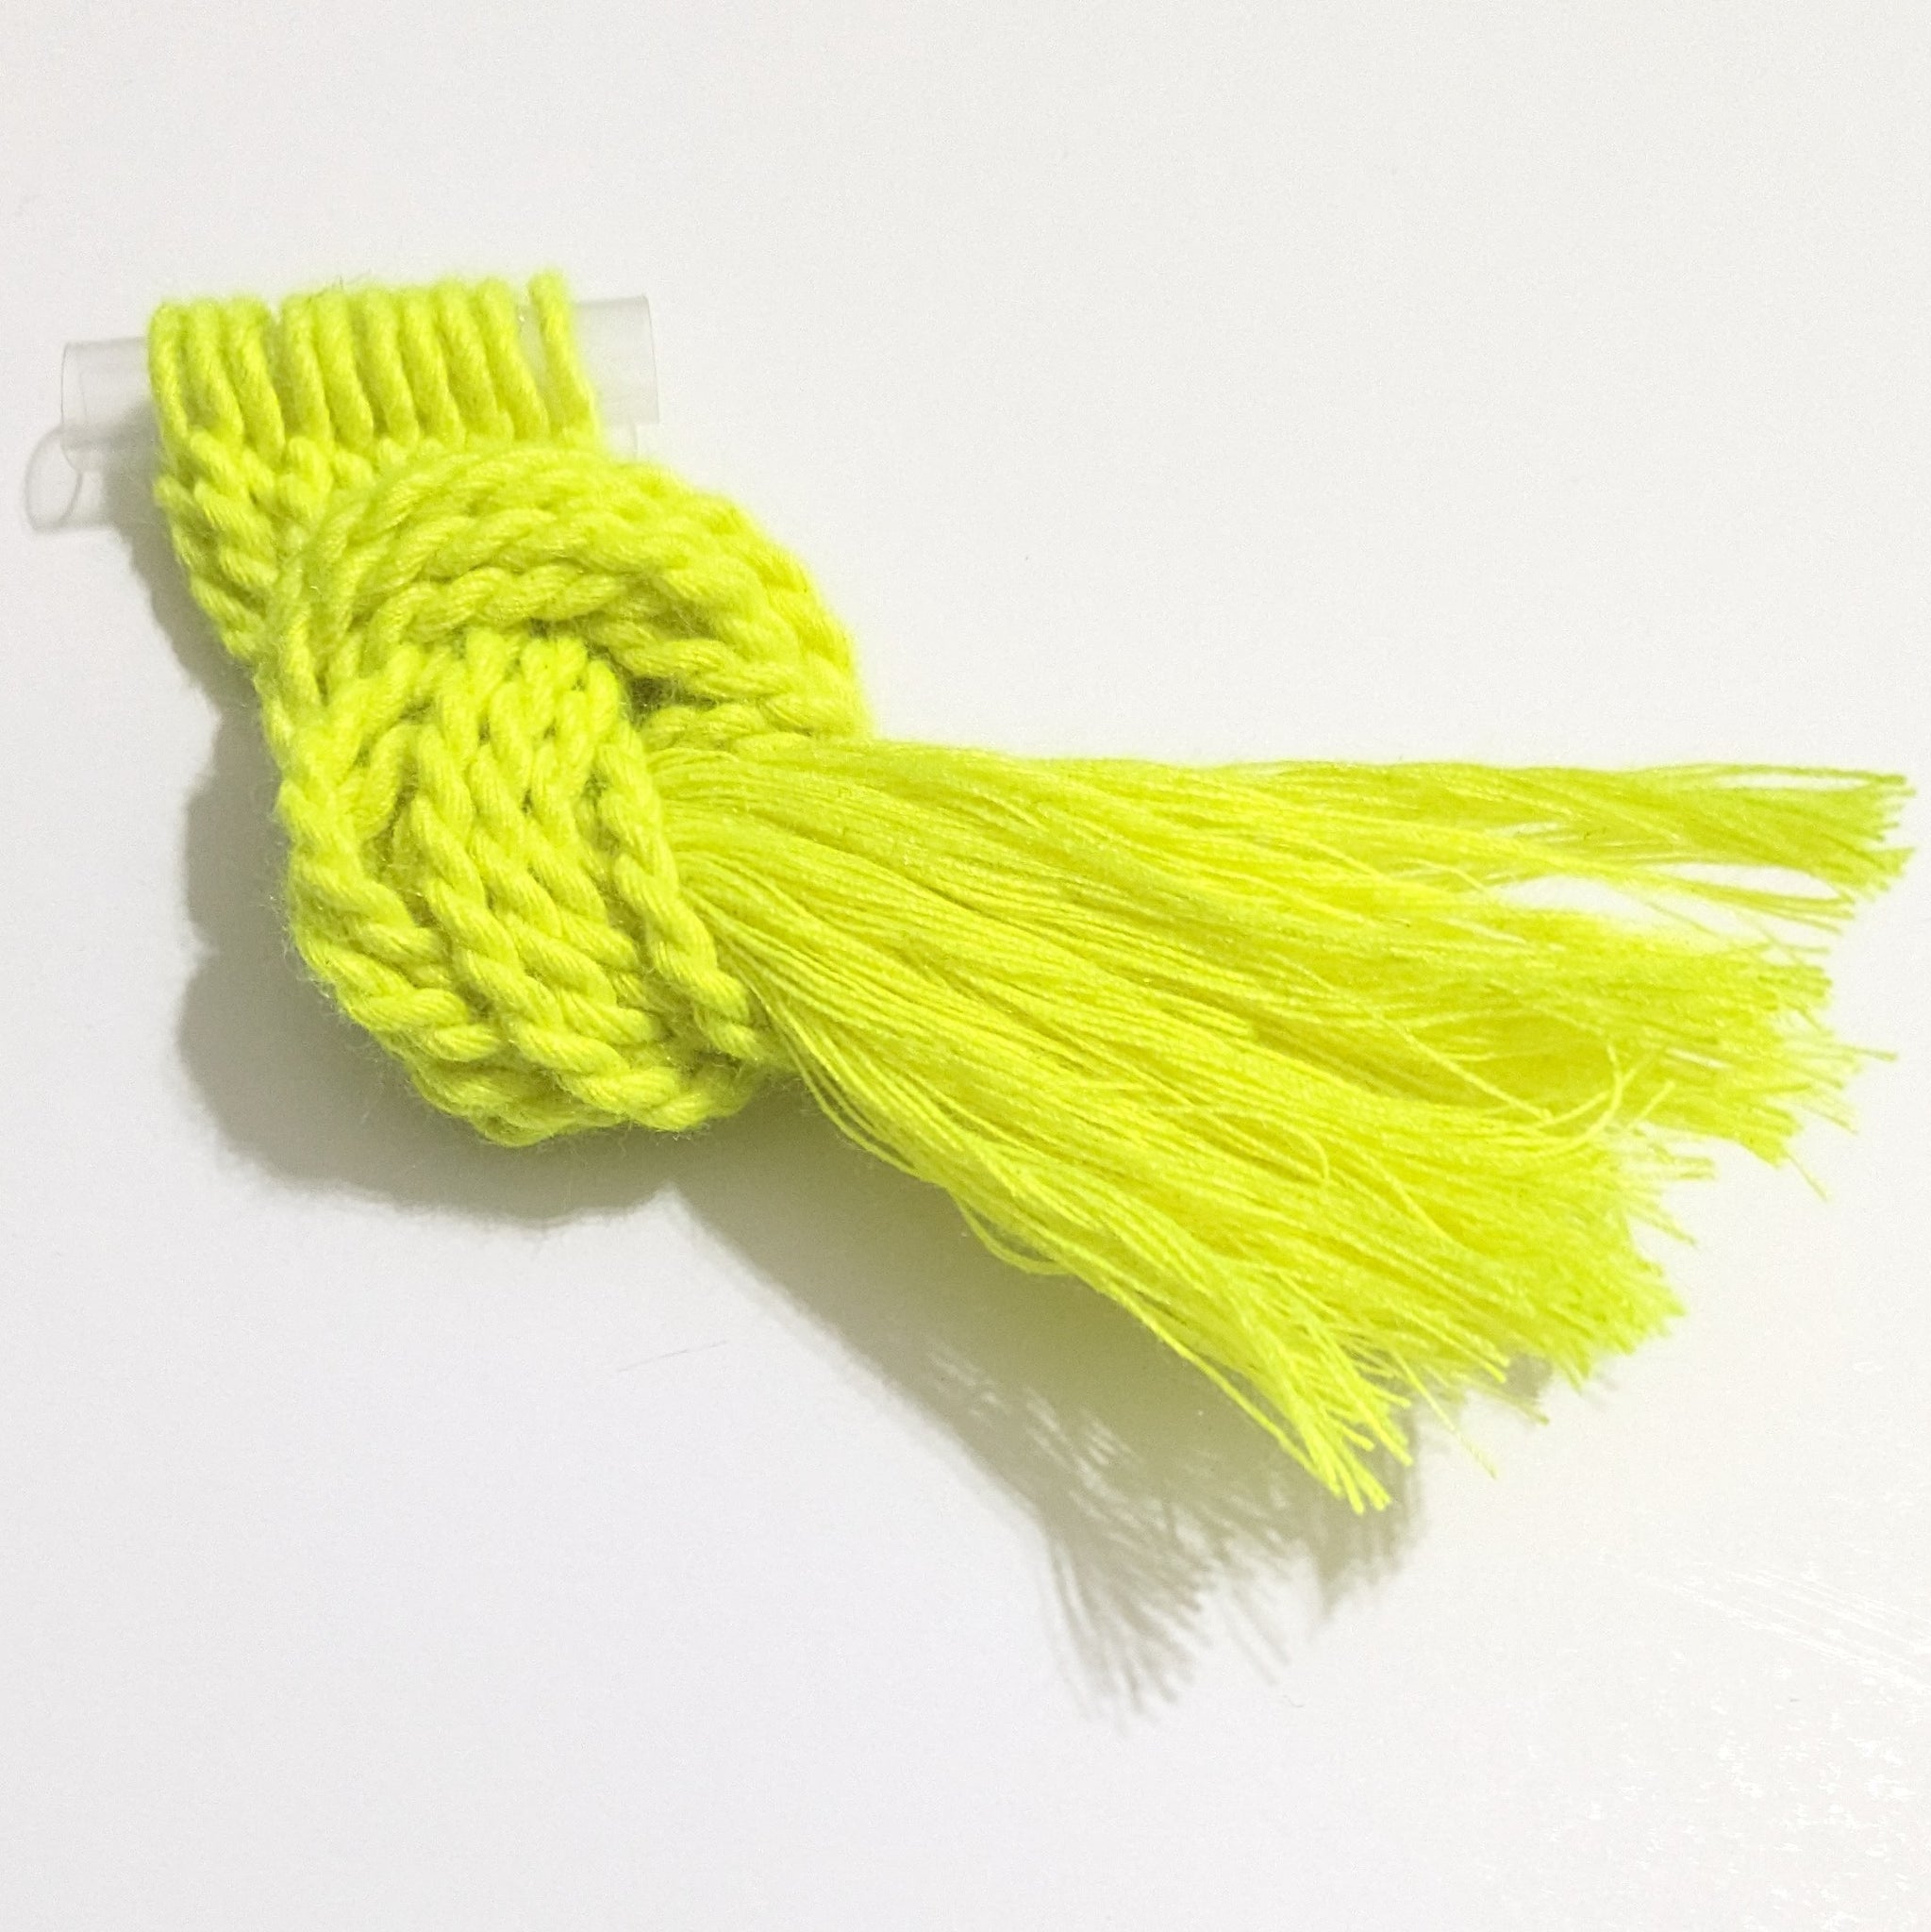 Hand Spun Crackers 10 pack created from Dupont Kevlar and other rugged Aramid and NOMEX fibers and threads